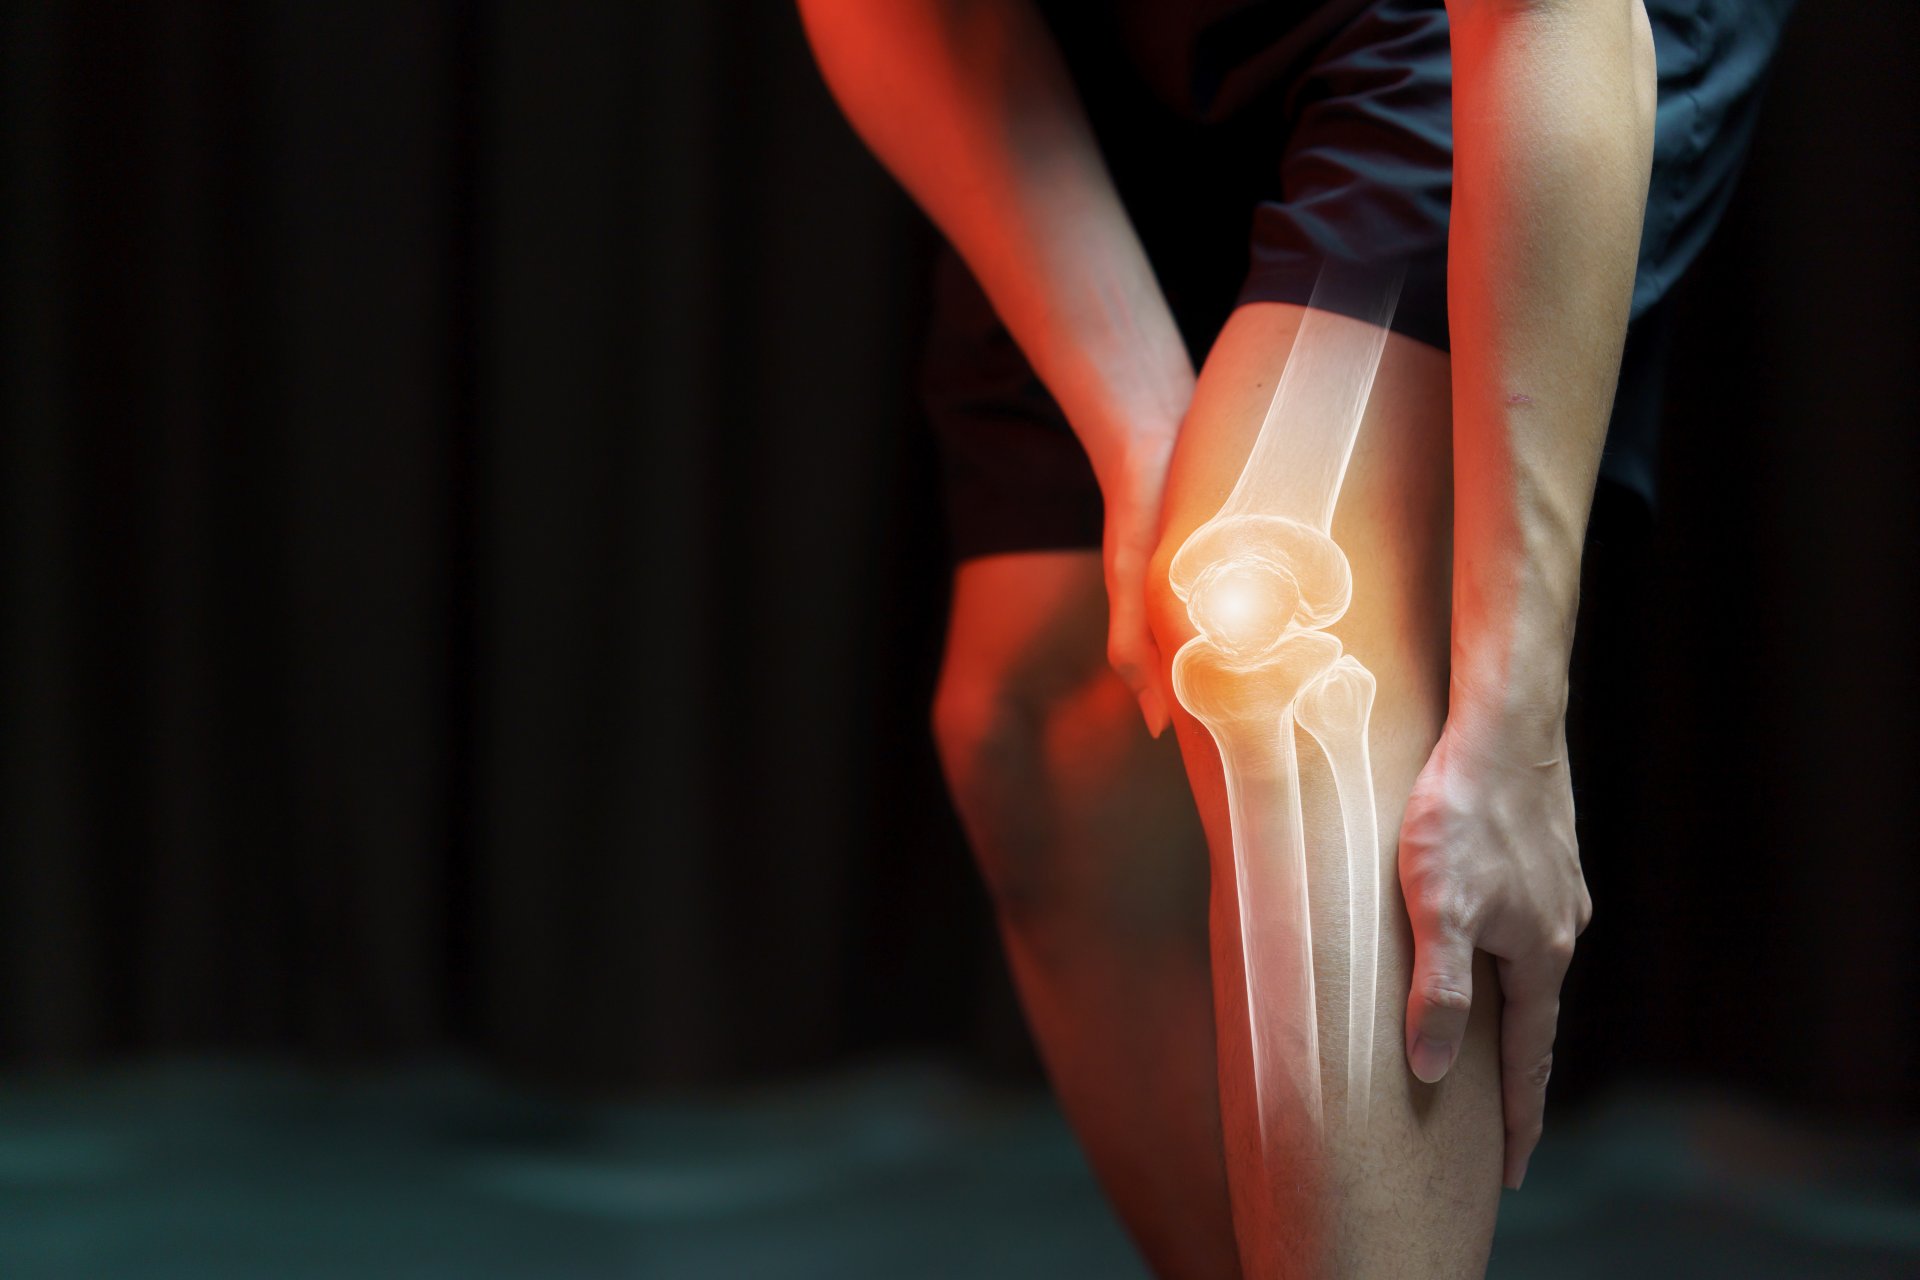 Physical Therapy in our clinic for Knee - Iliotibial Band Syndrome